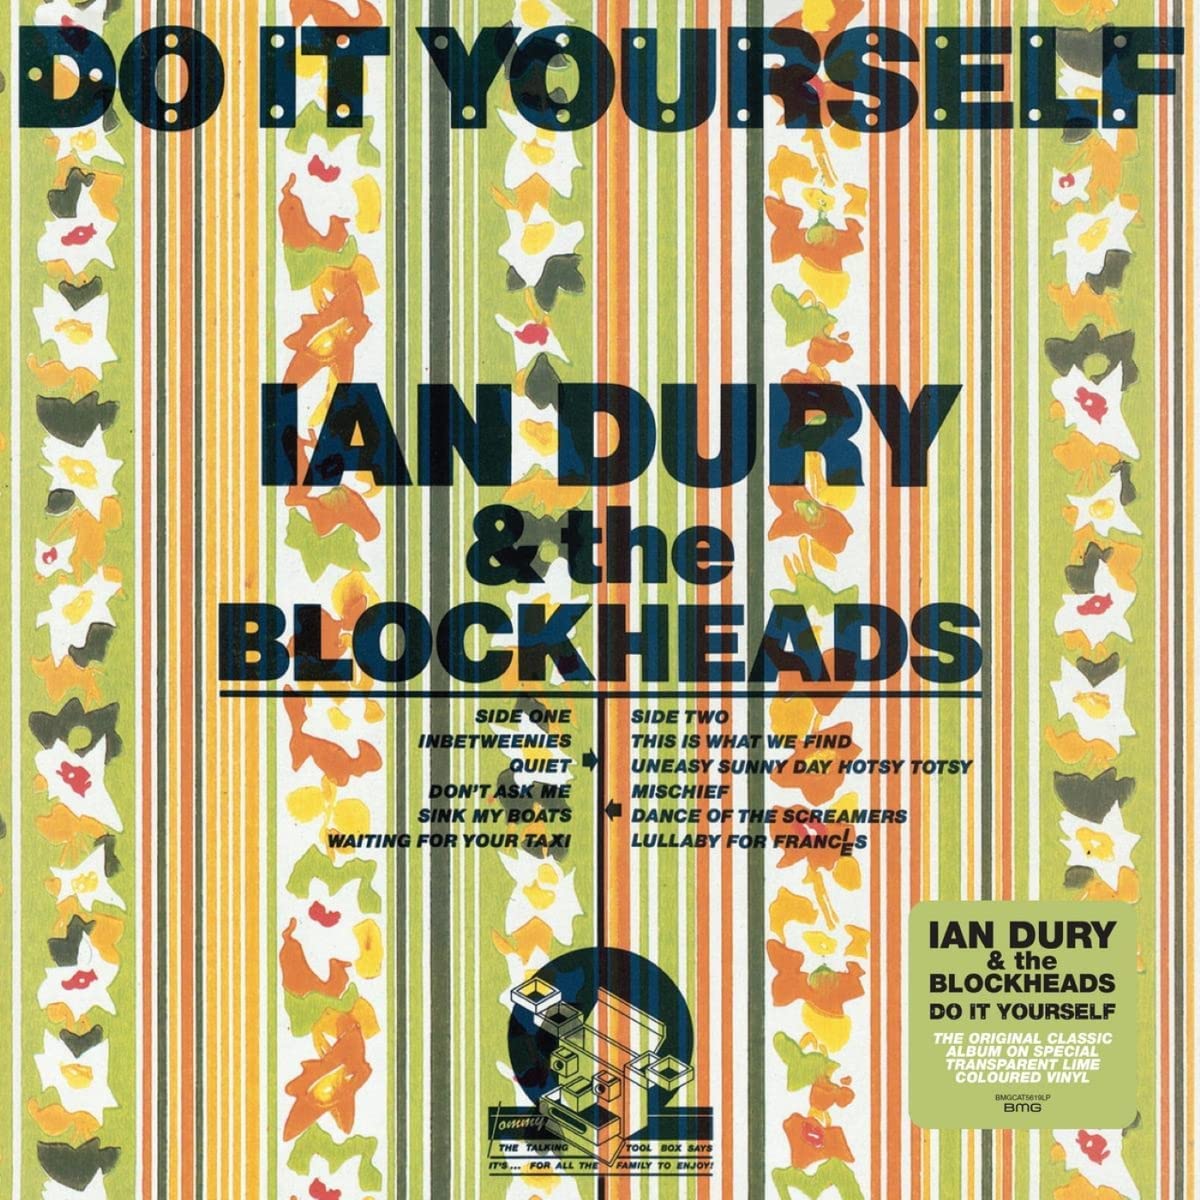 IAN DURY AND THE BLOCKHEADS - Do It Yourself (2022 Reissue) - LP - Transparent Lime Vinyl